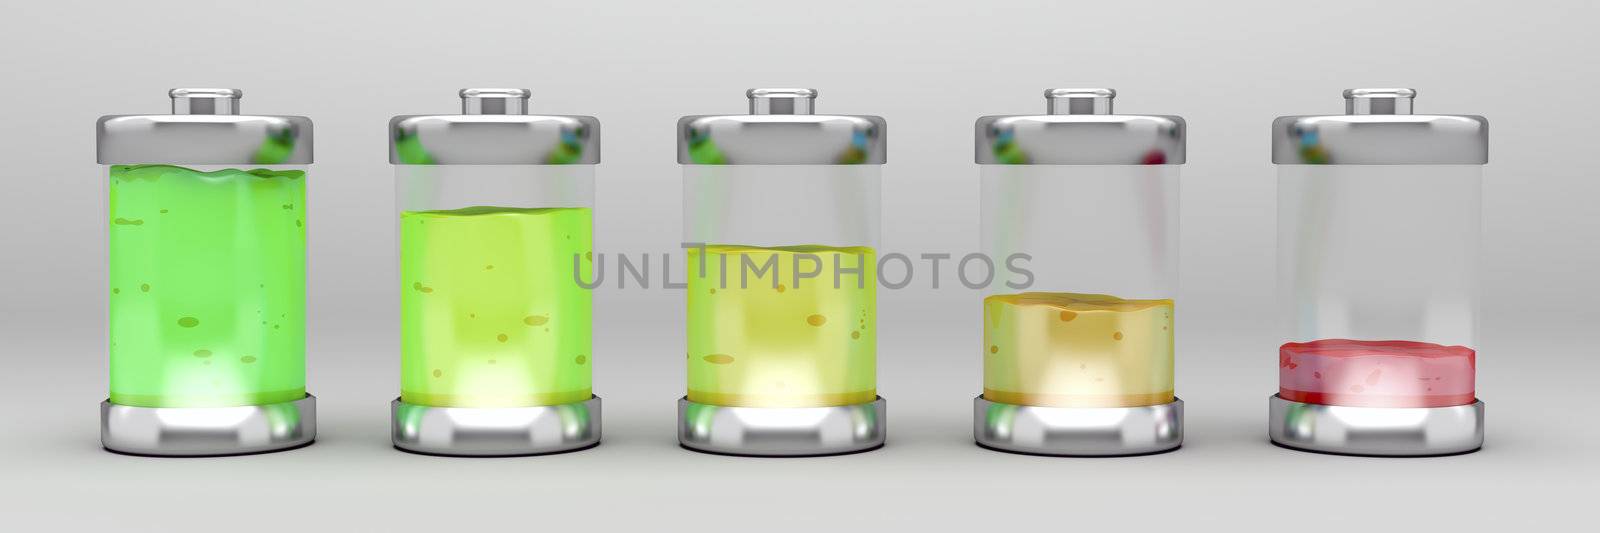 Liquid batteries by magraphics